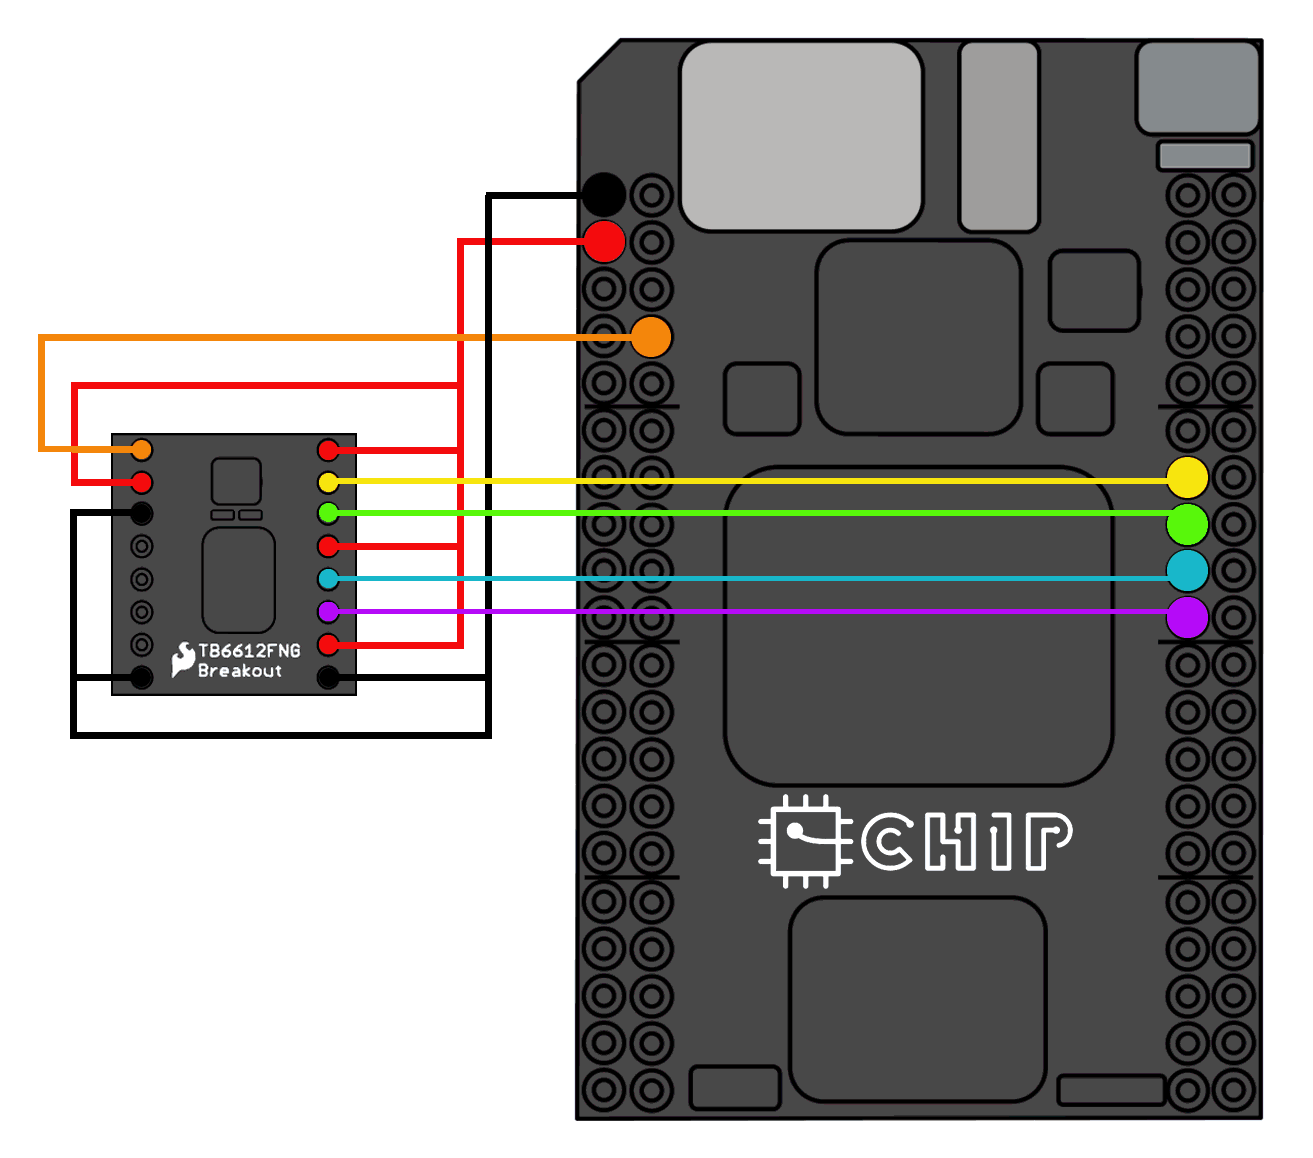 Wiring Diagram of a motor driver